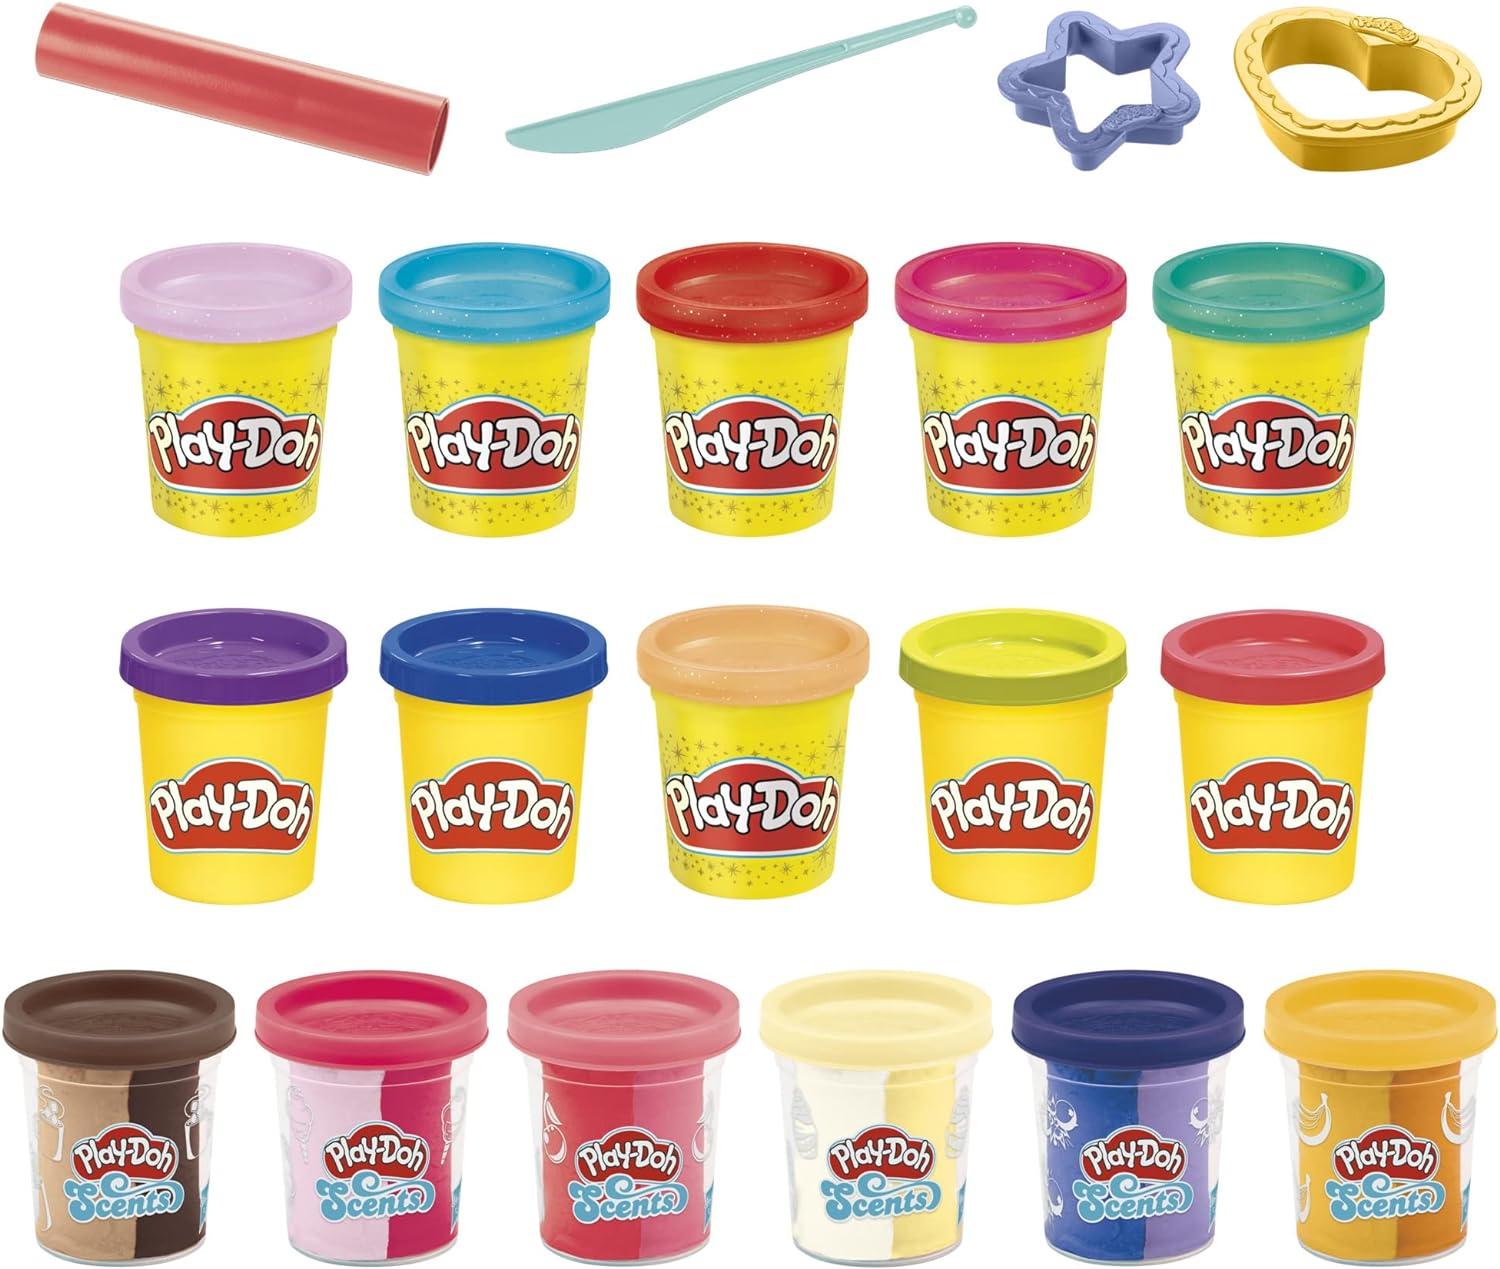 Play-Doh Sparkle and Scents Variety Pack of 16 Cans for $6.39